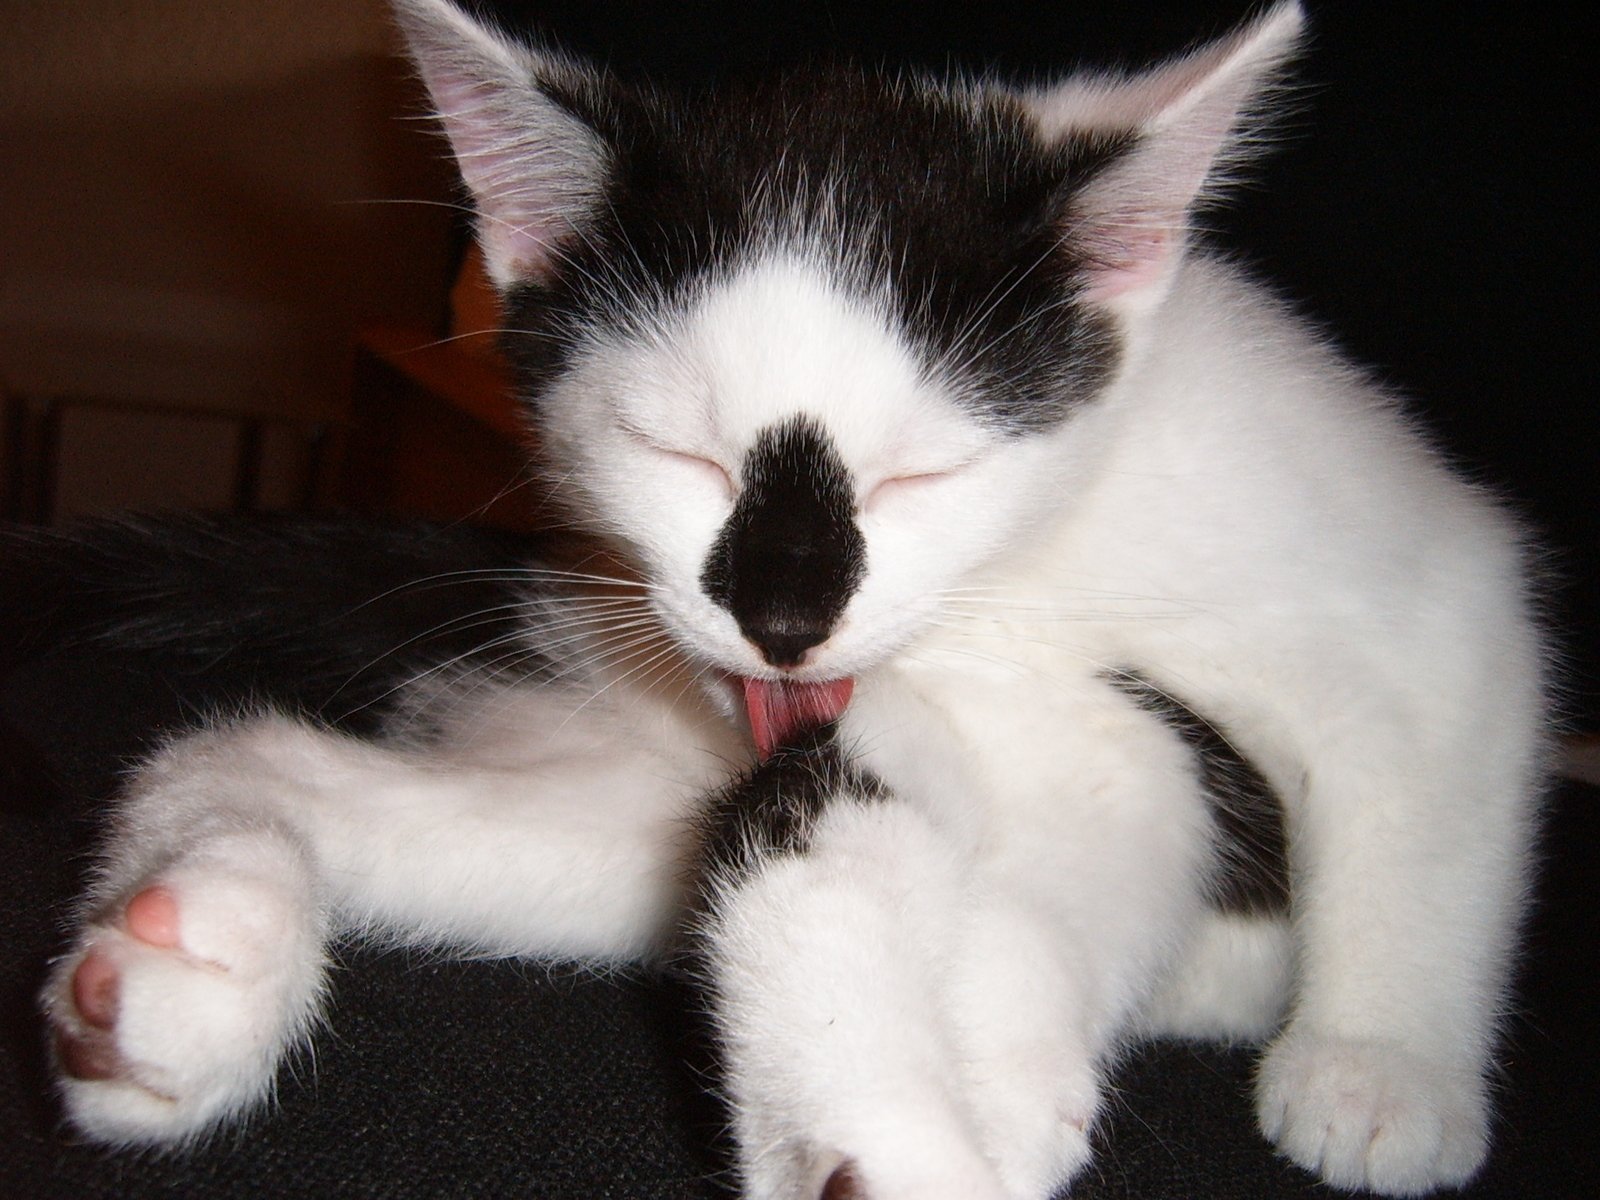 the kitten is laying down, yawning